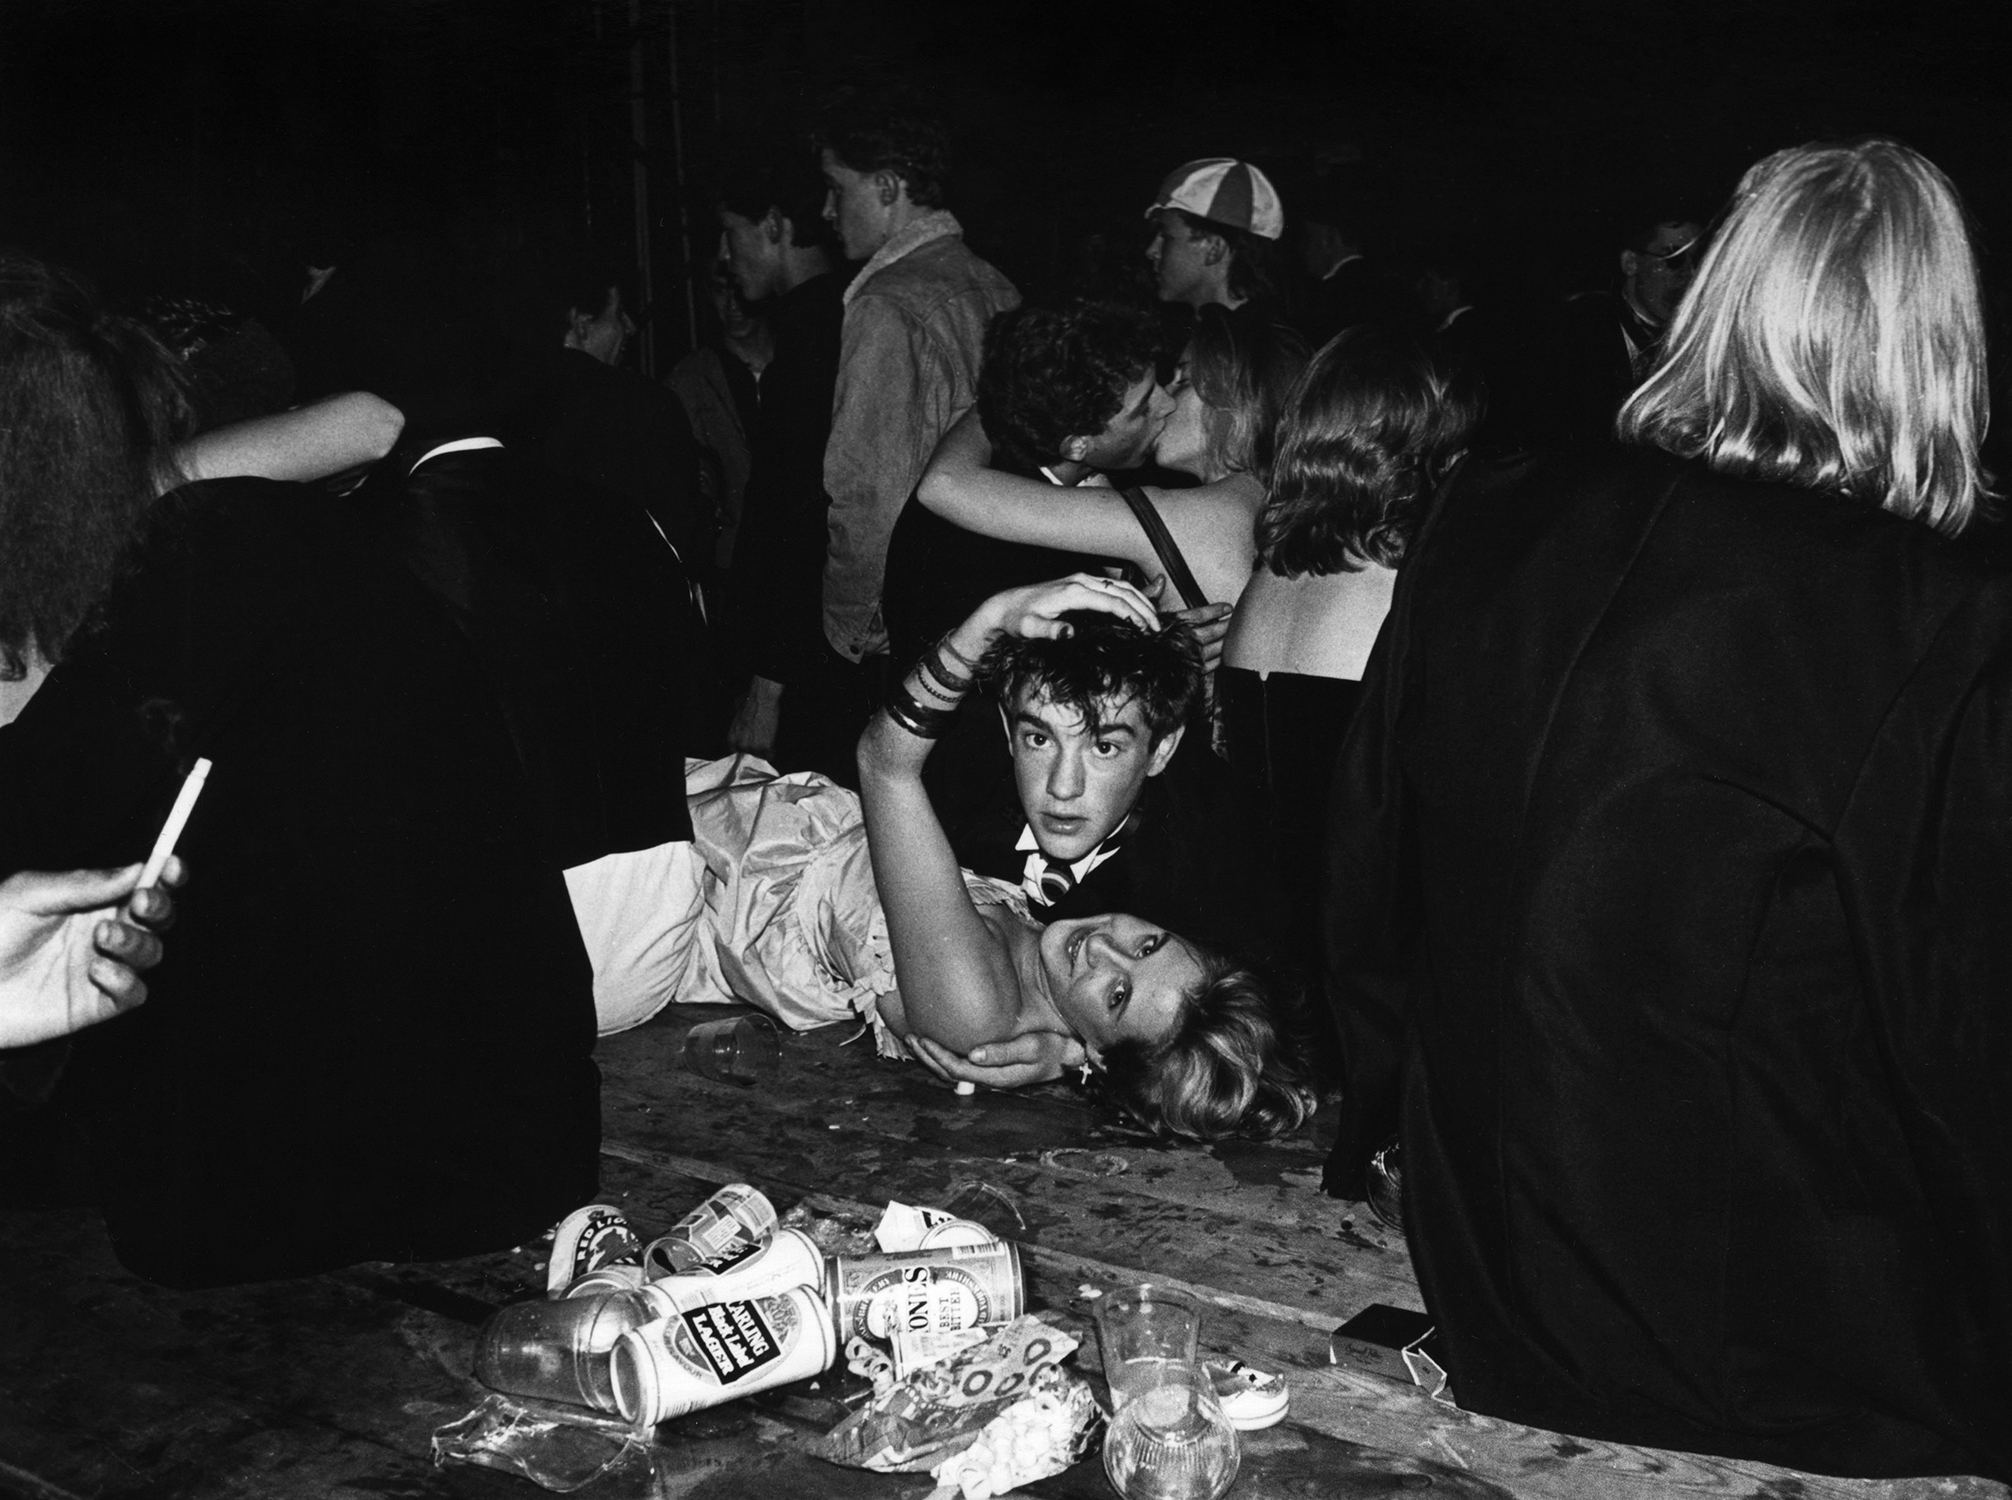 Halloween Ball 1987 © Dafydd Jones, from the book The Last Hurrah published by STANLEY/BARKER